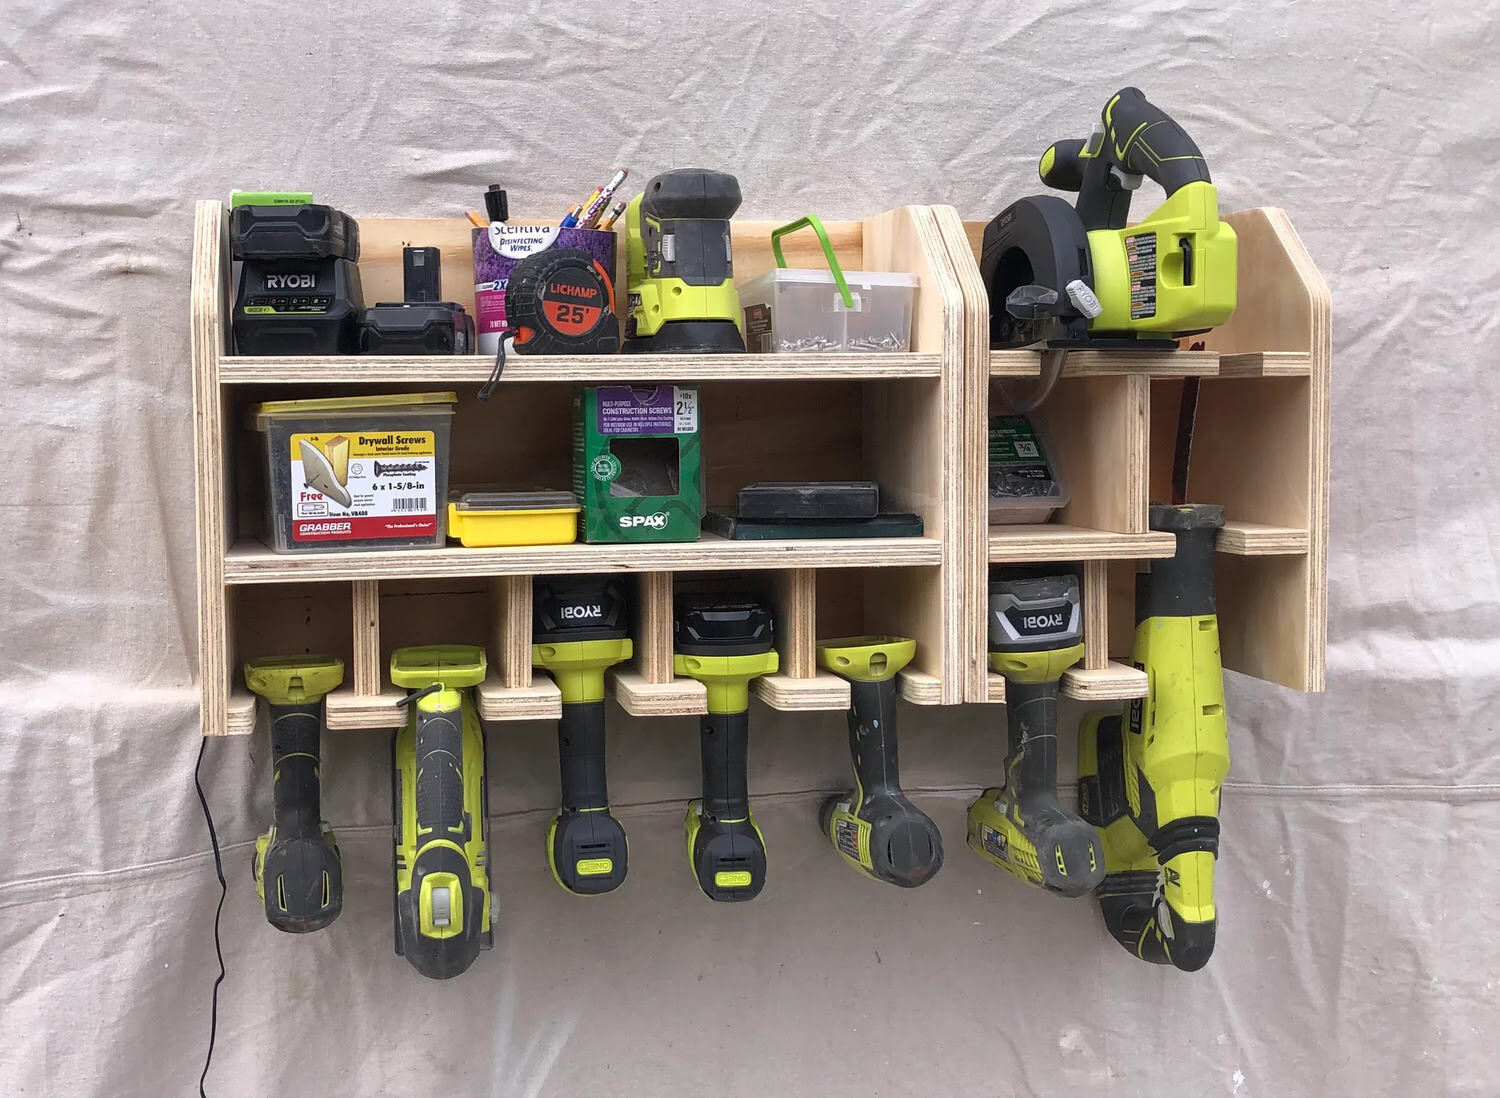 https://storables.com/wp-content/uploads/2023/09/how-to-store-cordless-power-tools-1695130067.jpg